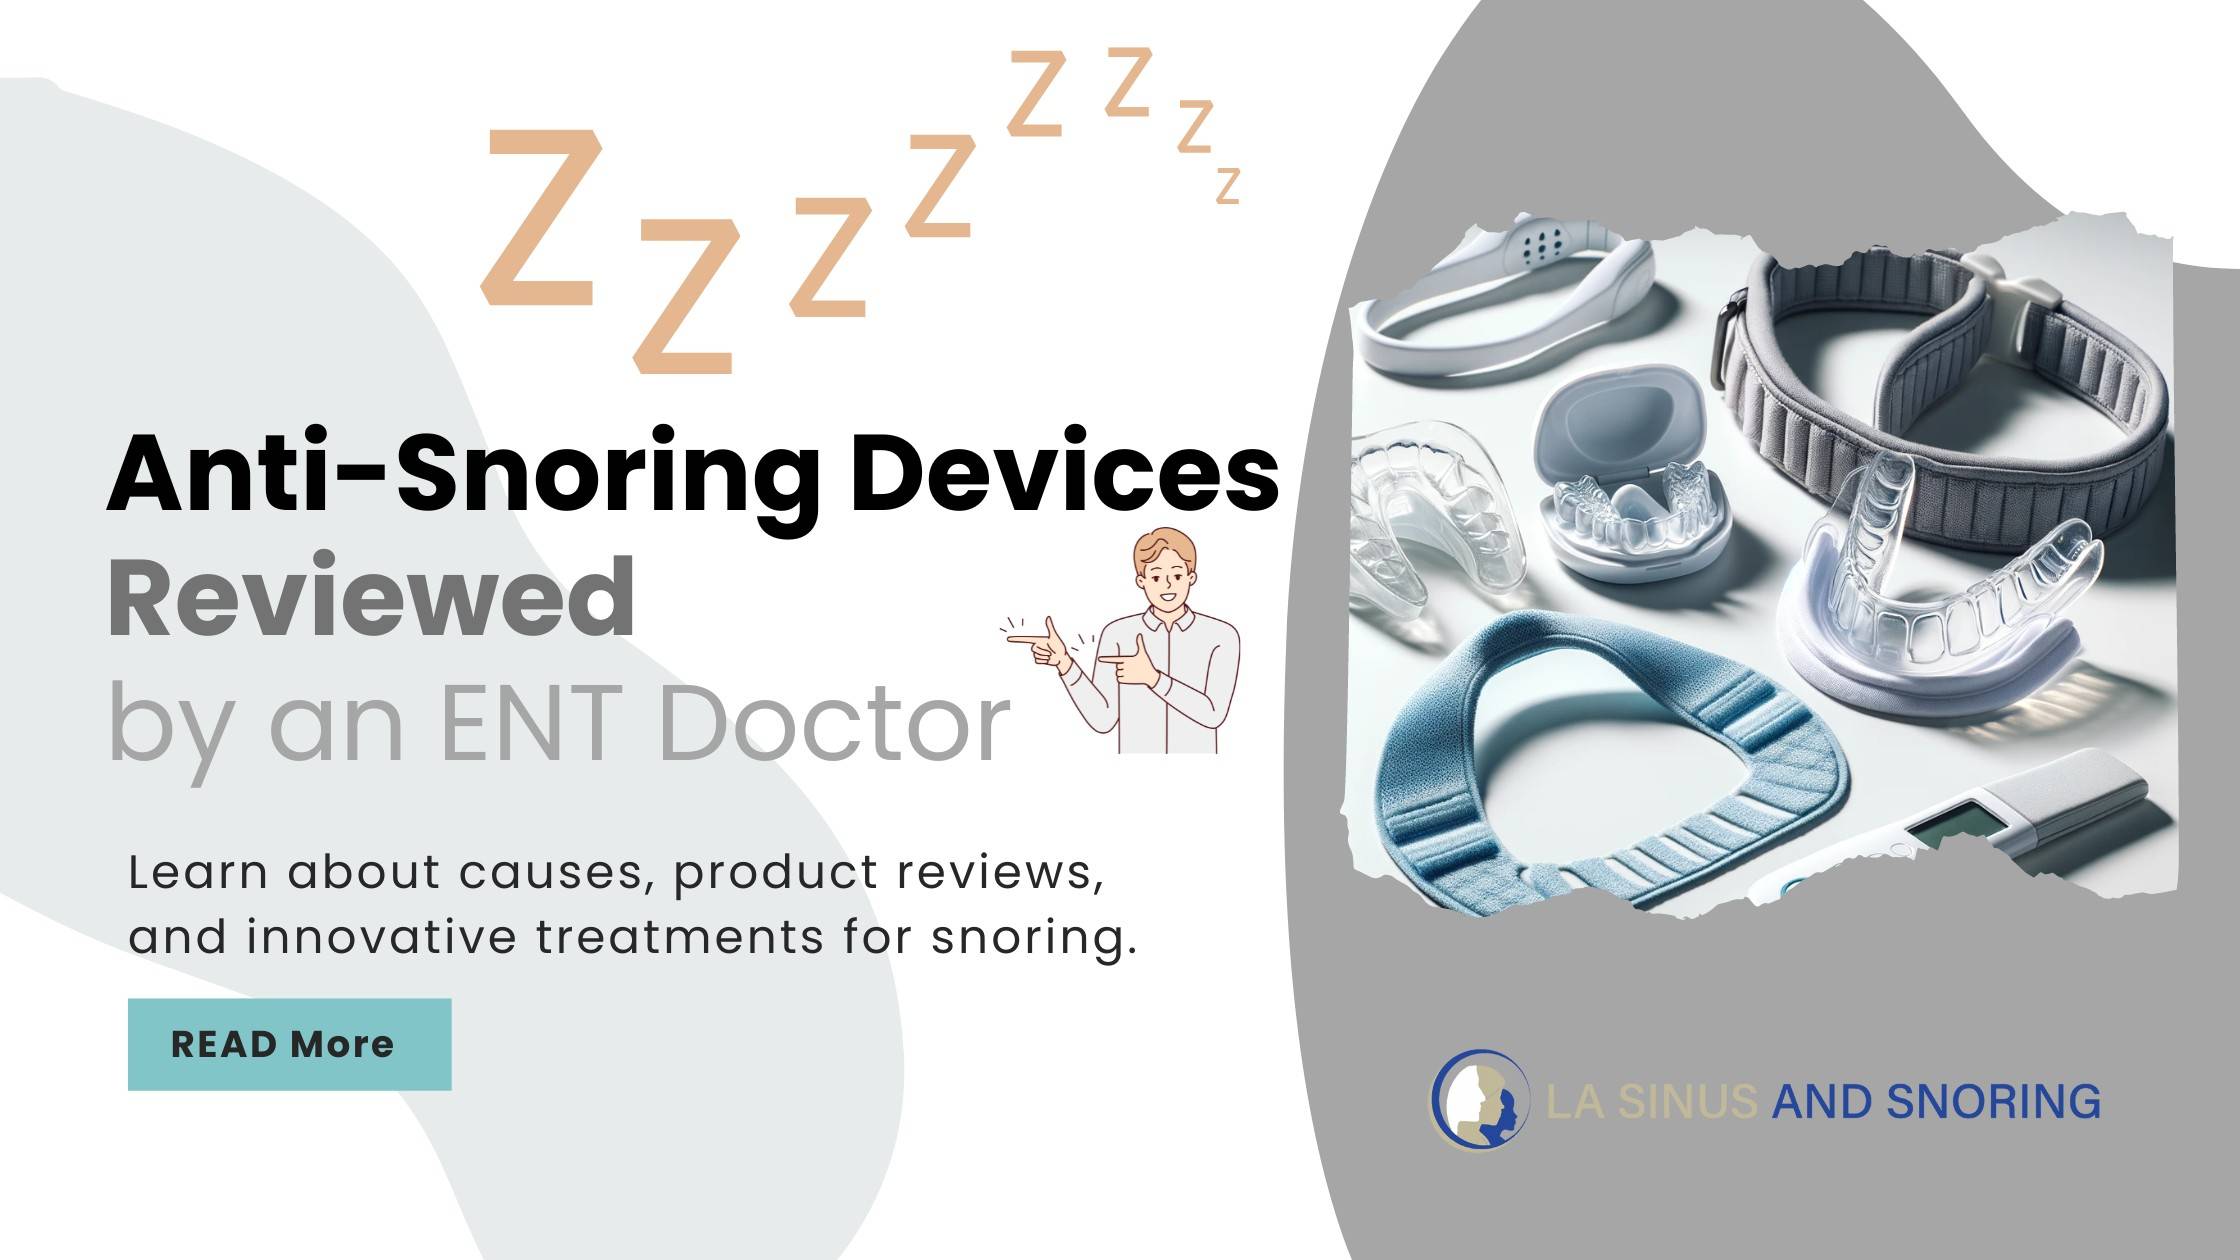 Anti-Snoring Devices Reviewed by an ENT Doctor